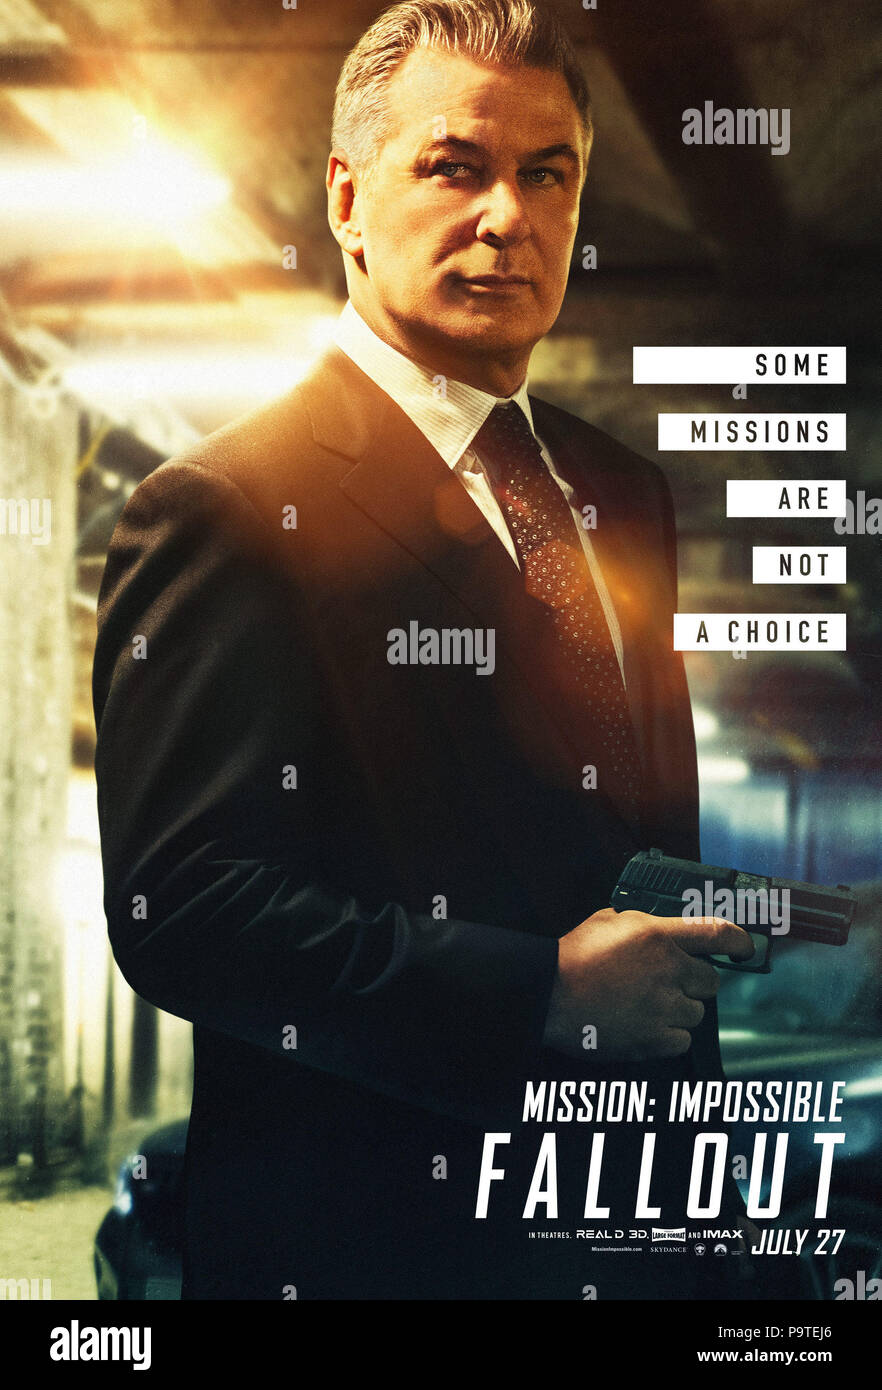 RELEASE DATE: July 27, 2018 TITLE: Mission: Impossible - Fallout STUDIO: Paramount Pictures DIRECTOR: Christopher McQuarrie PLOT: Ethan Hunt and his IMF team, along with some familiar allies, race against time after a mission gone wrong. STARRING: Poster art ALEC BALDWIN as Alan Hunley. (Credit Image: © Paramount Pictures/Entertainment Pictures) Stock Photo